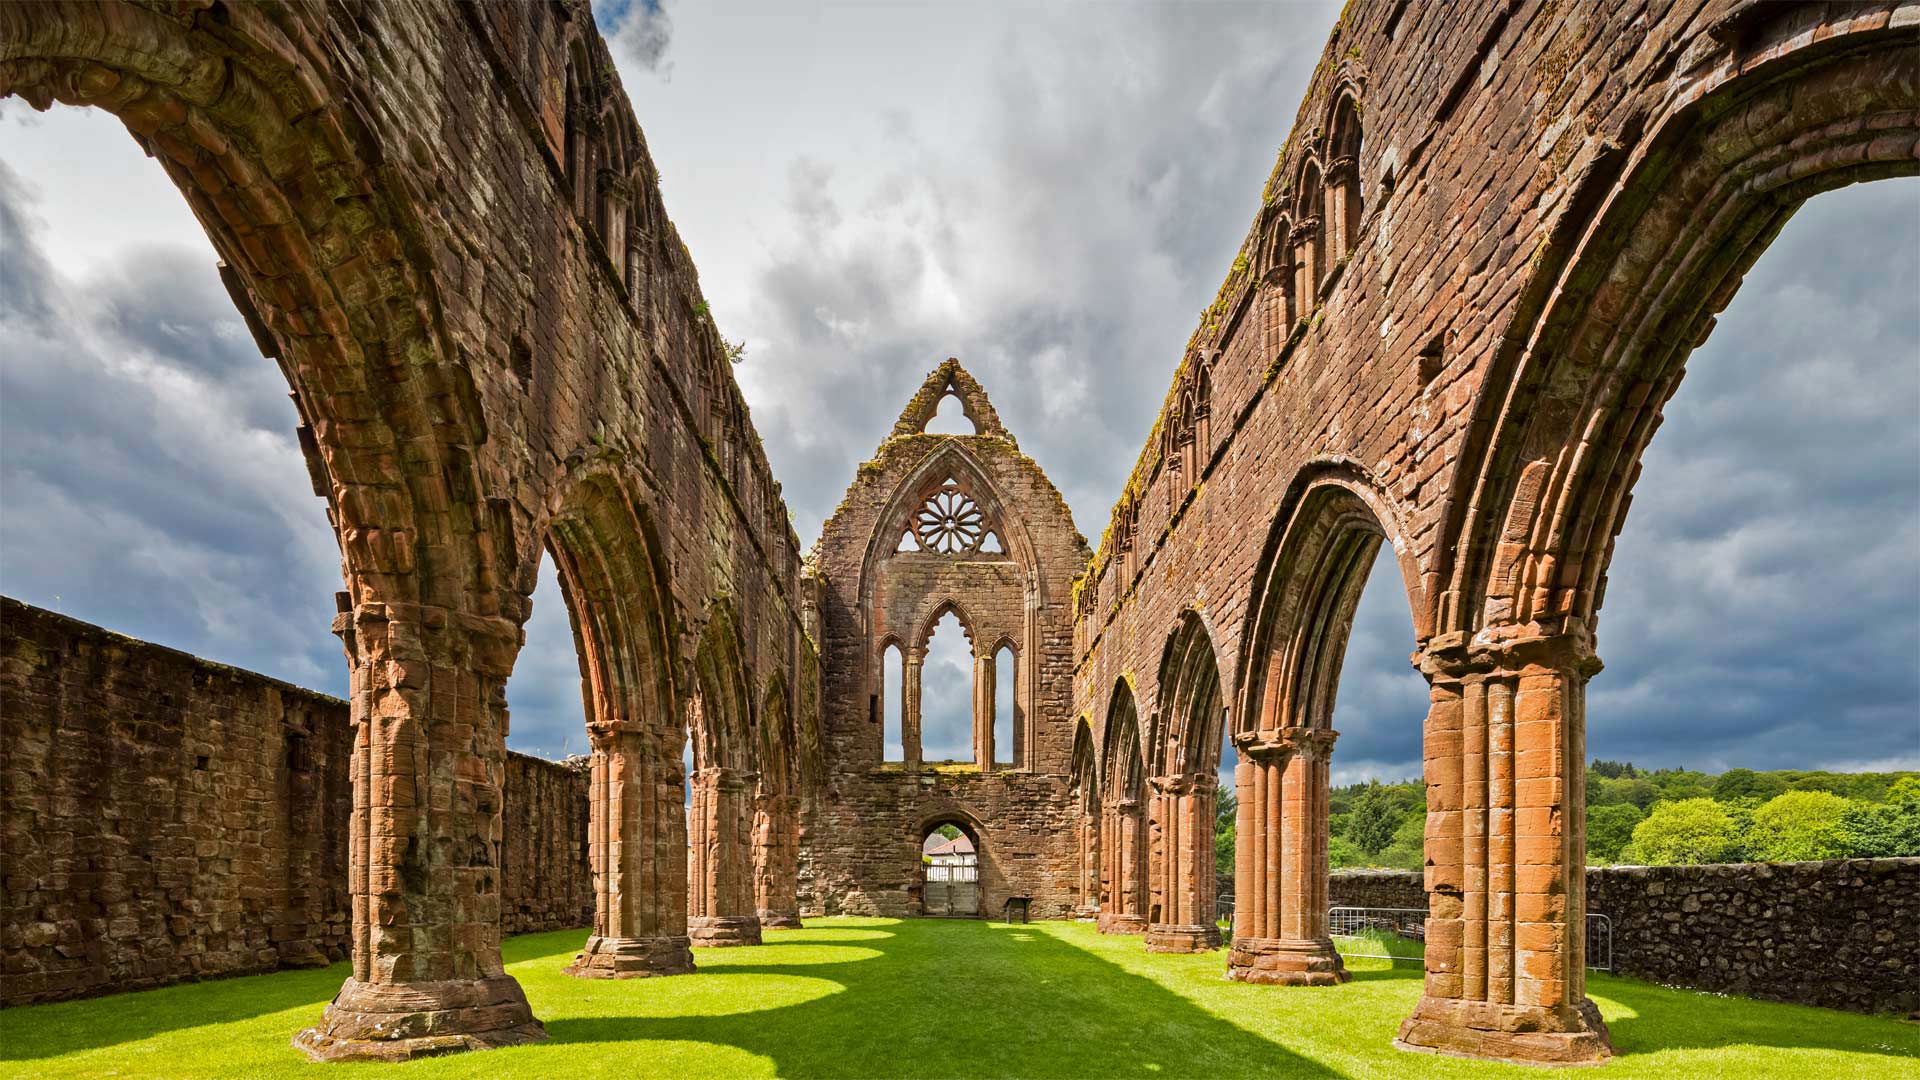 Sweetheart Abbey, Dumfries and Galloway, Scotland - Westend61/Getty Images)